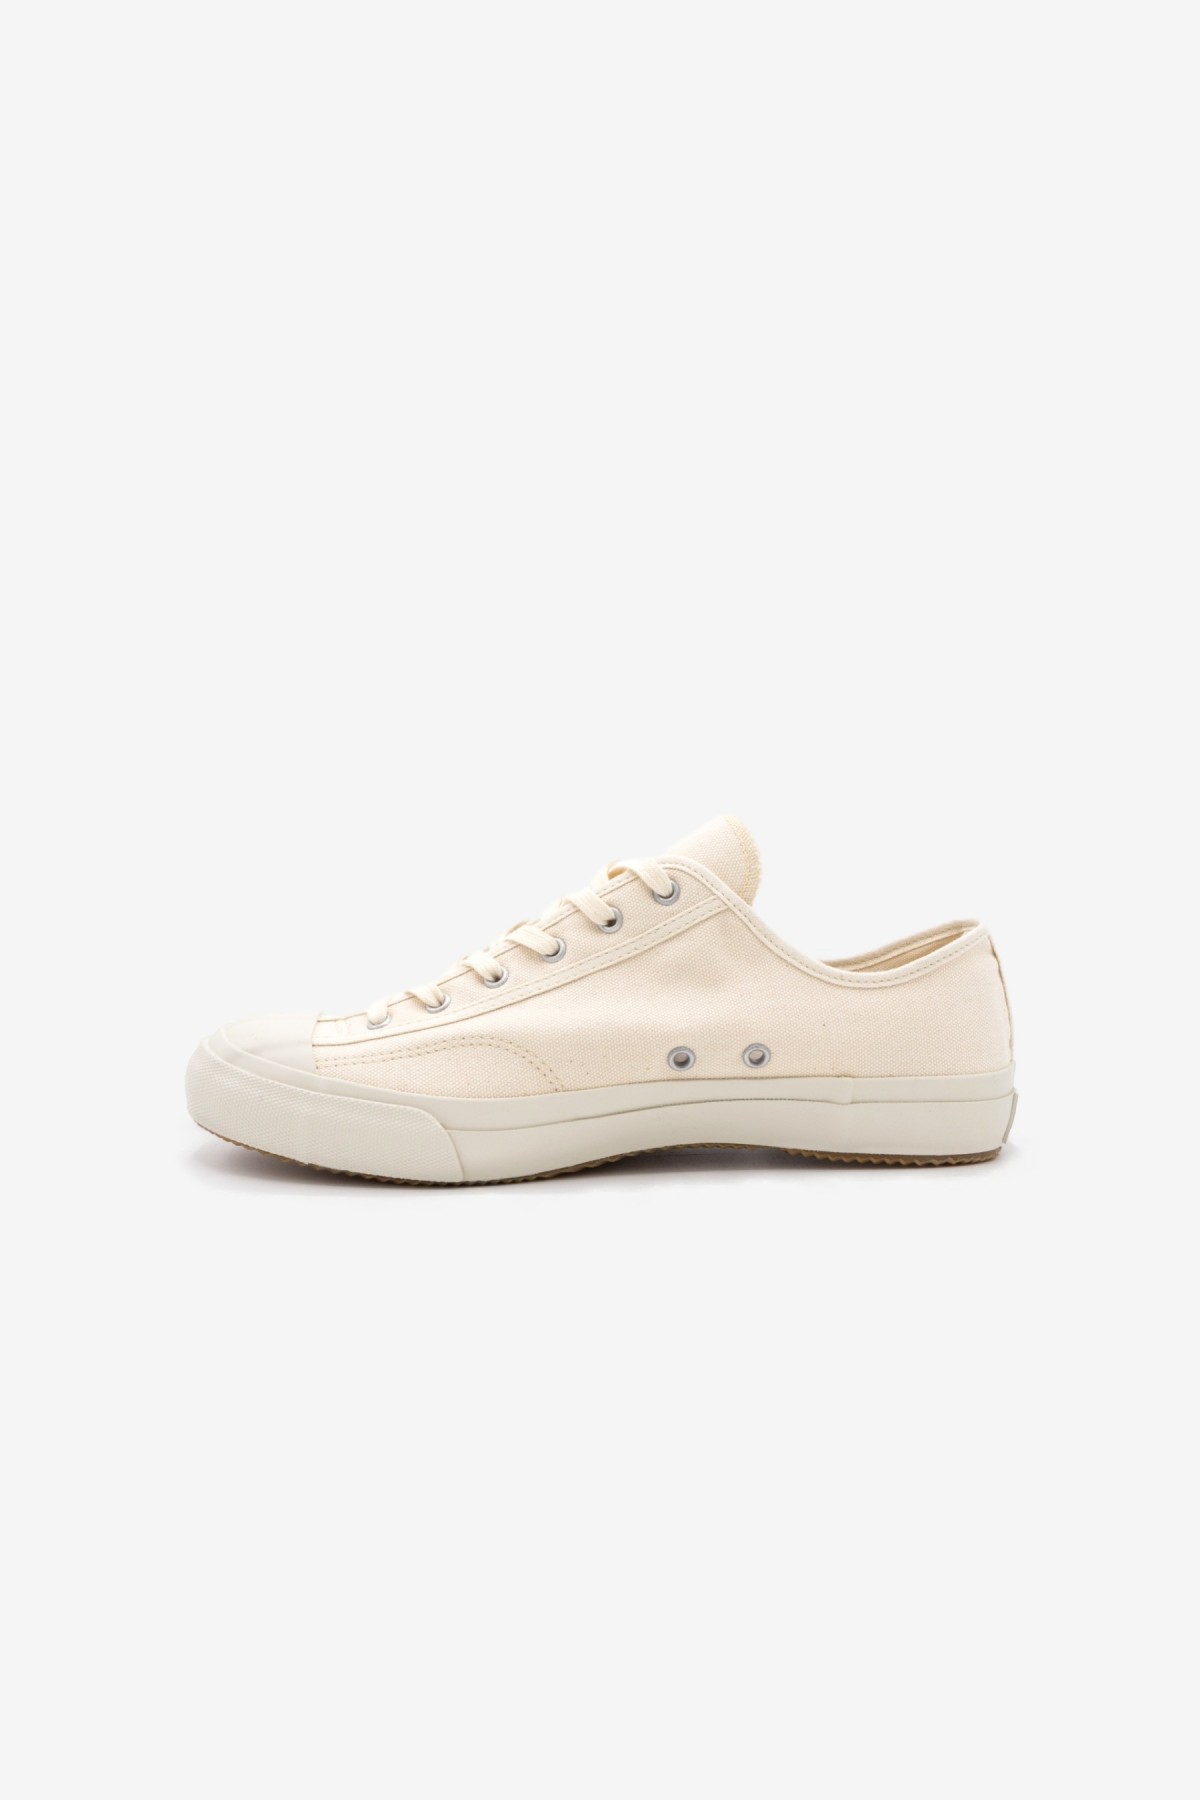 Moonstar Gym Classic in White